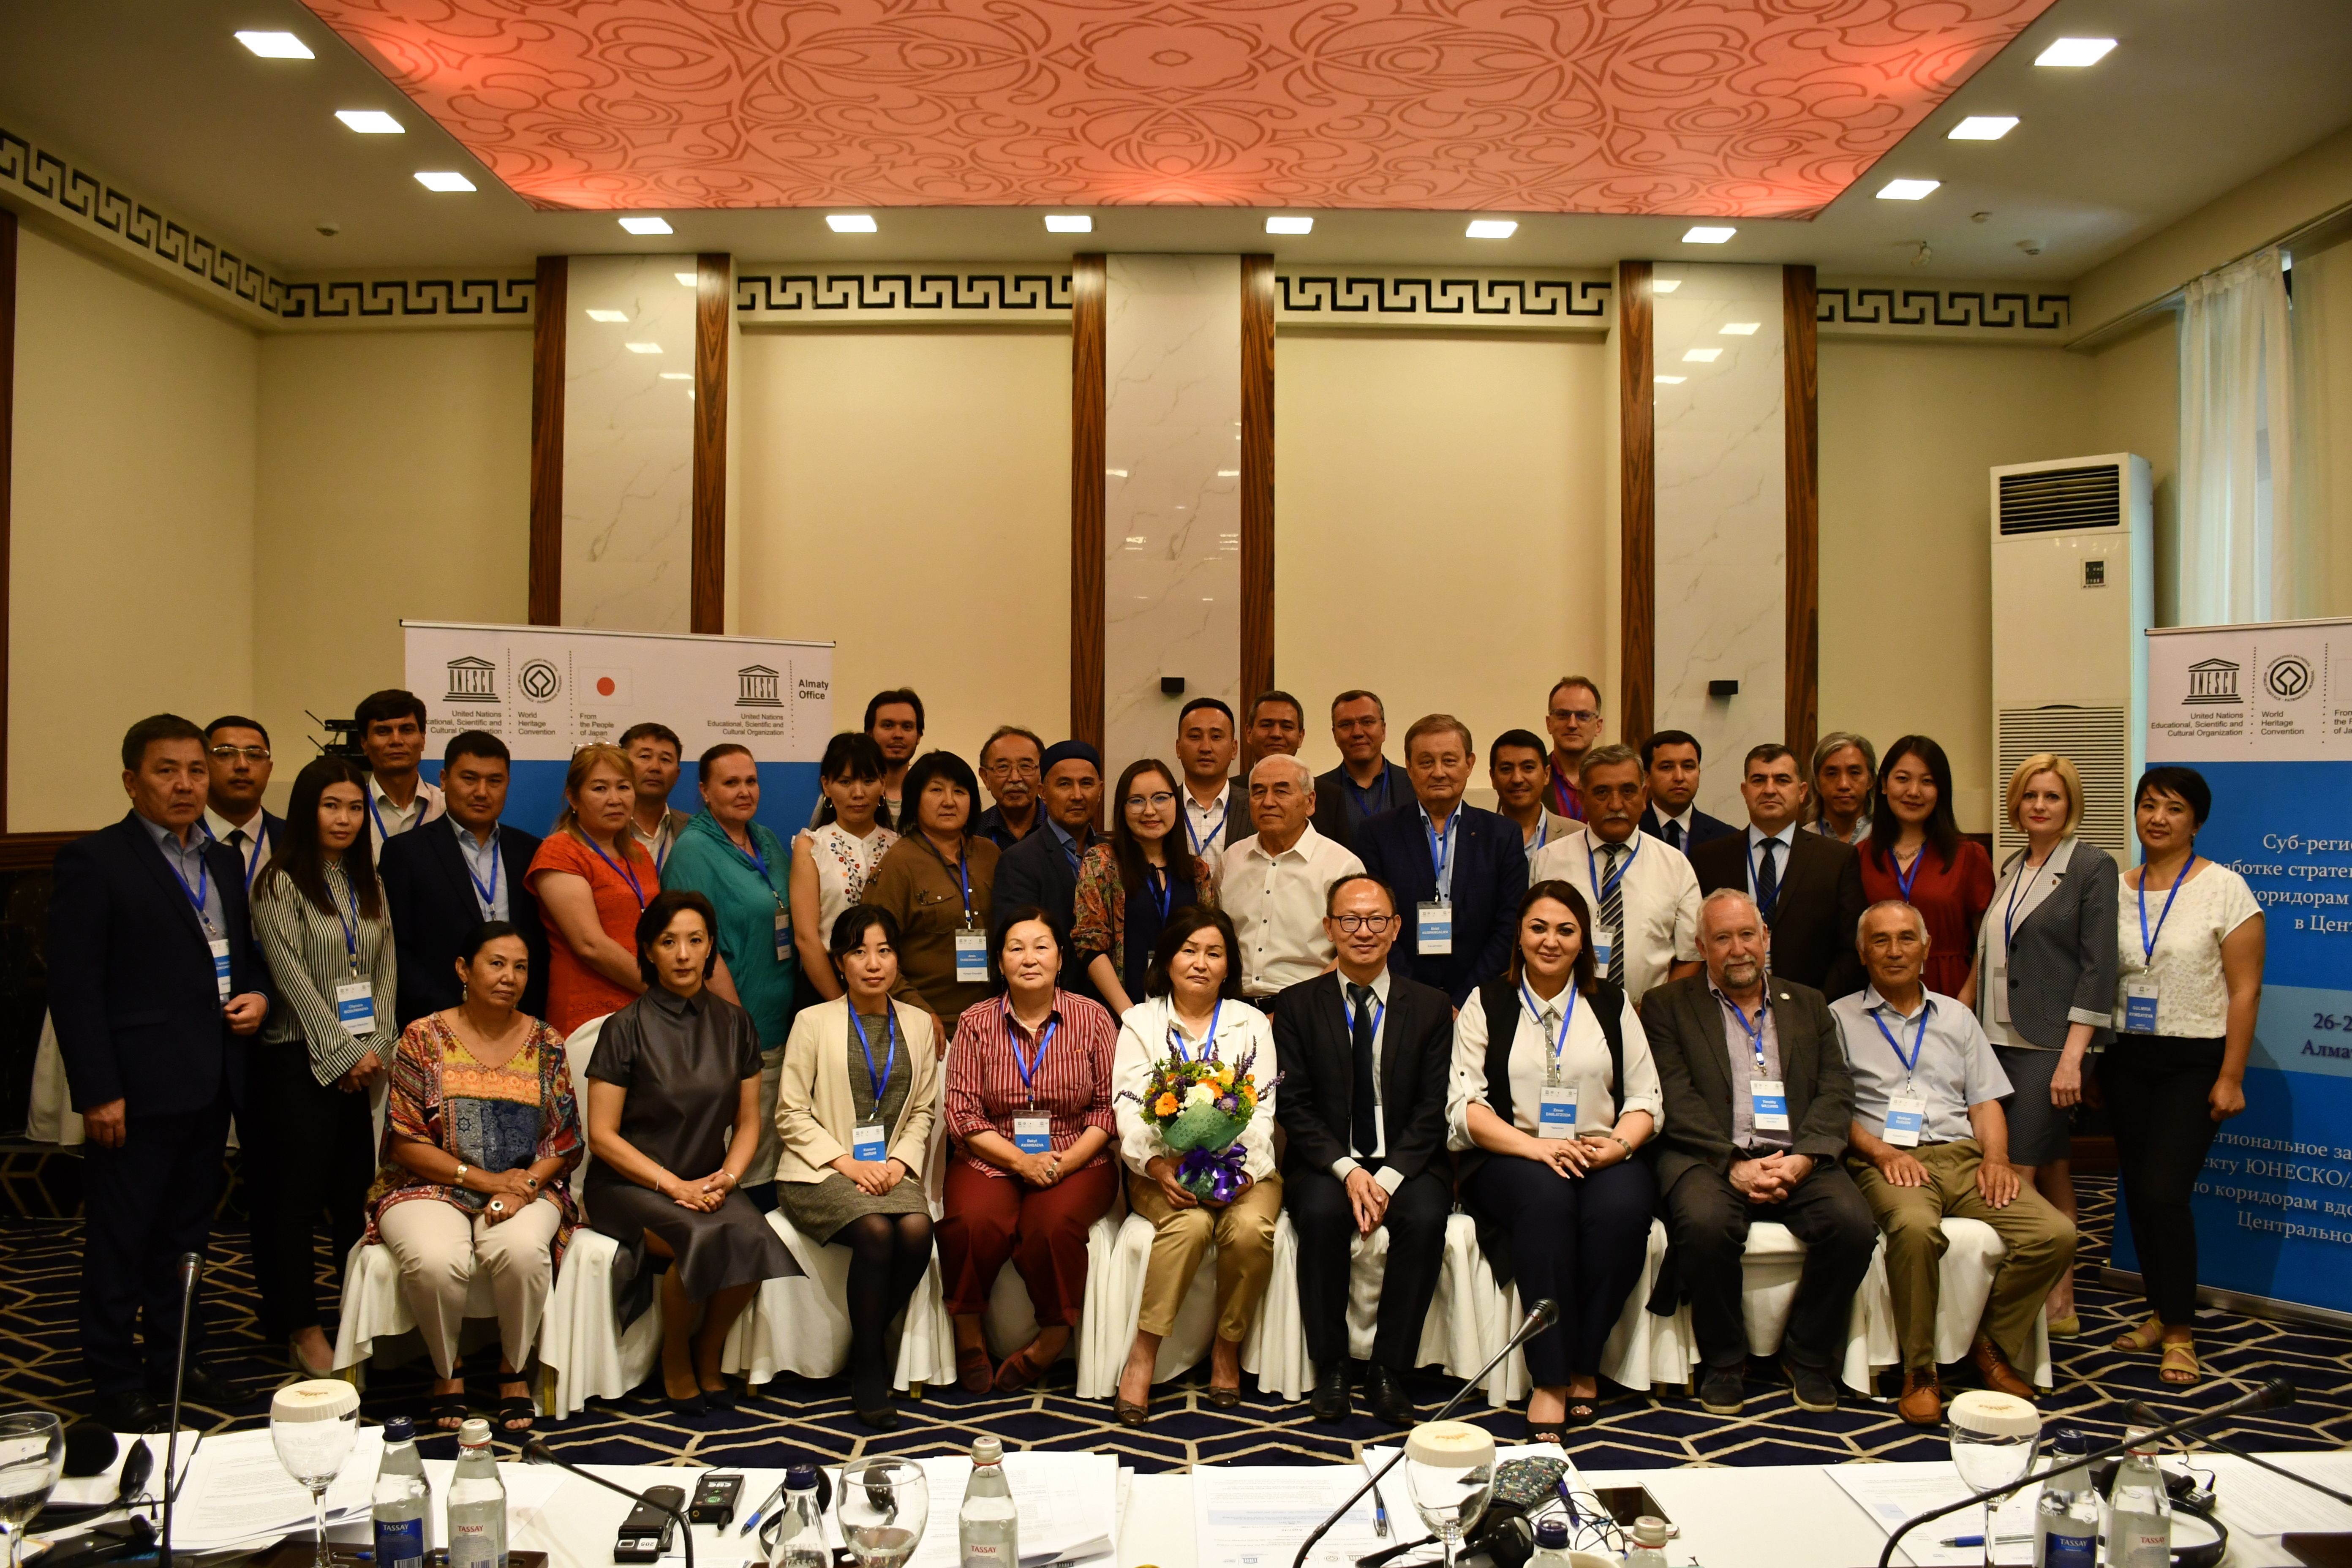 Subregional Workshop for Conservation and Management Strategies for Silk Roads Heritage Corridors in Central Asia. Almaty, 2019. Group photo